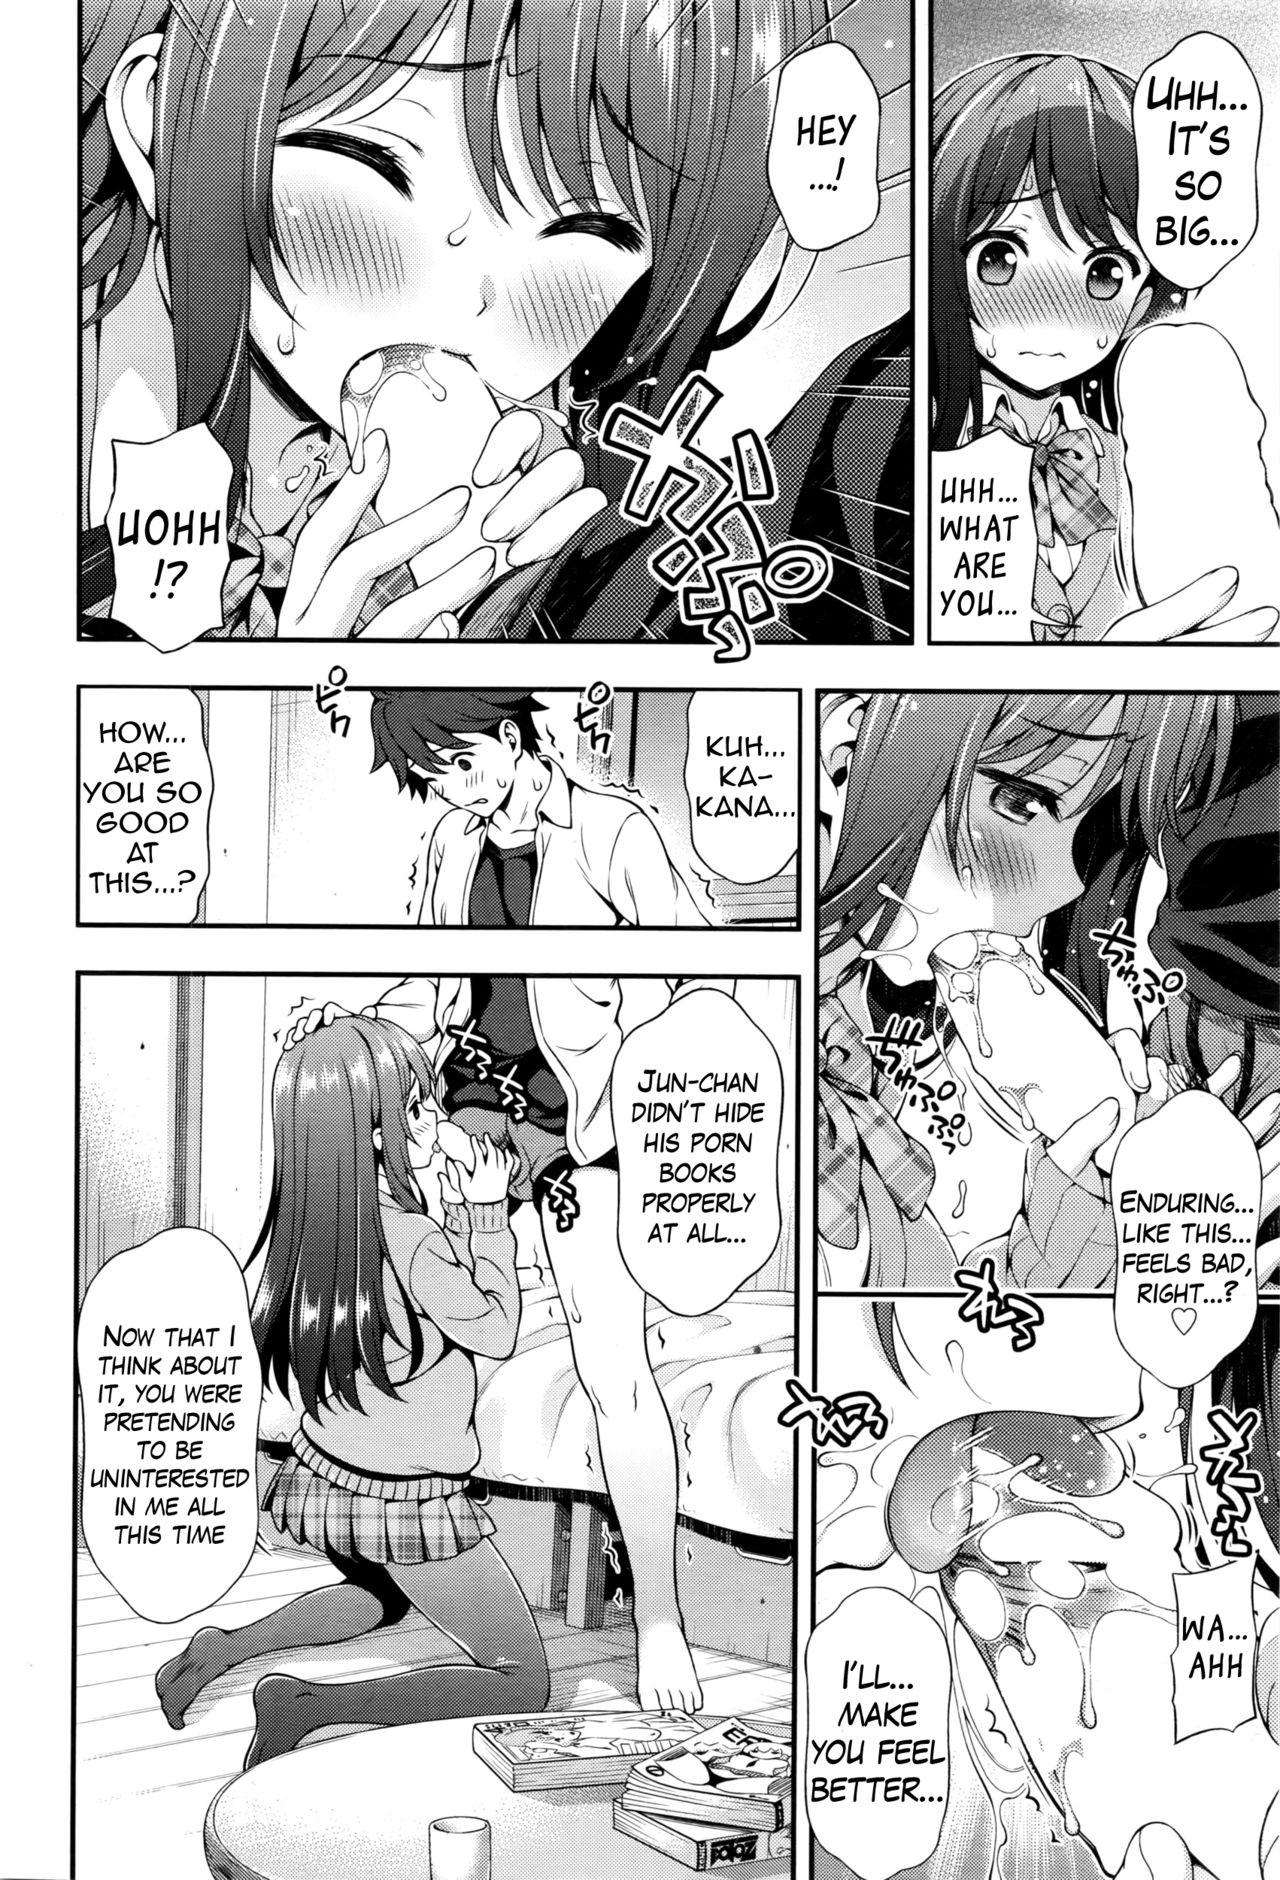 Reverse Cowgirl Akai Ito no Noroi | The Red String's Curse Girls - Page 12